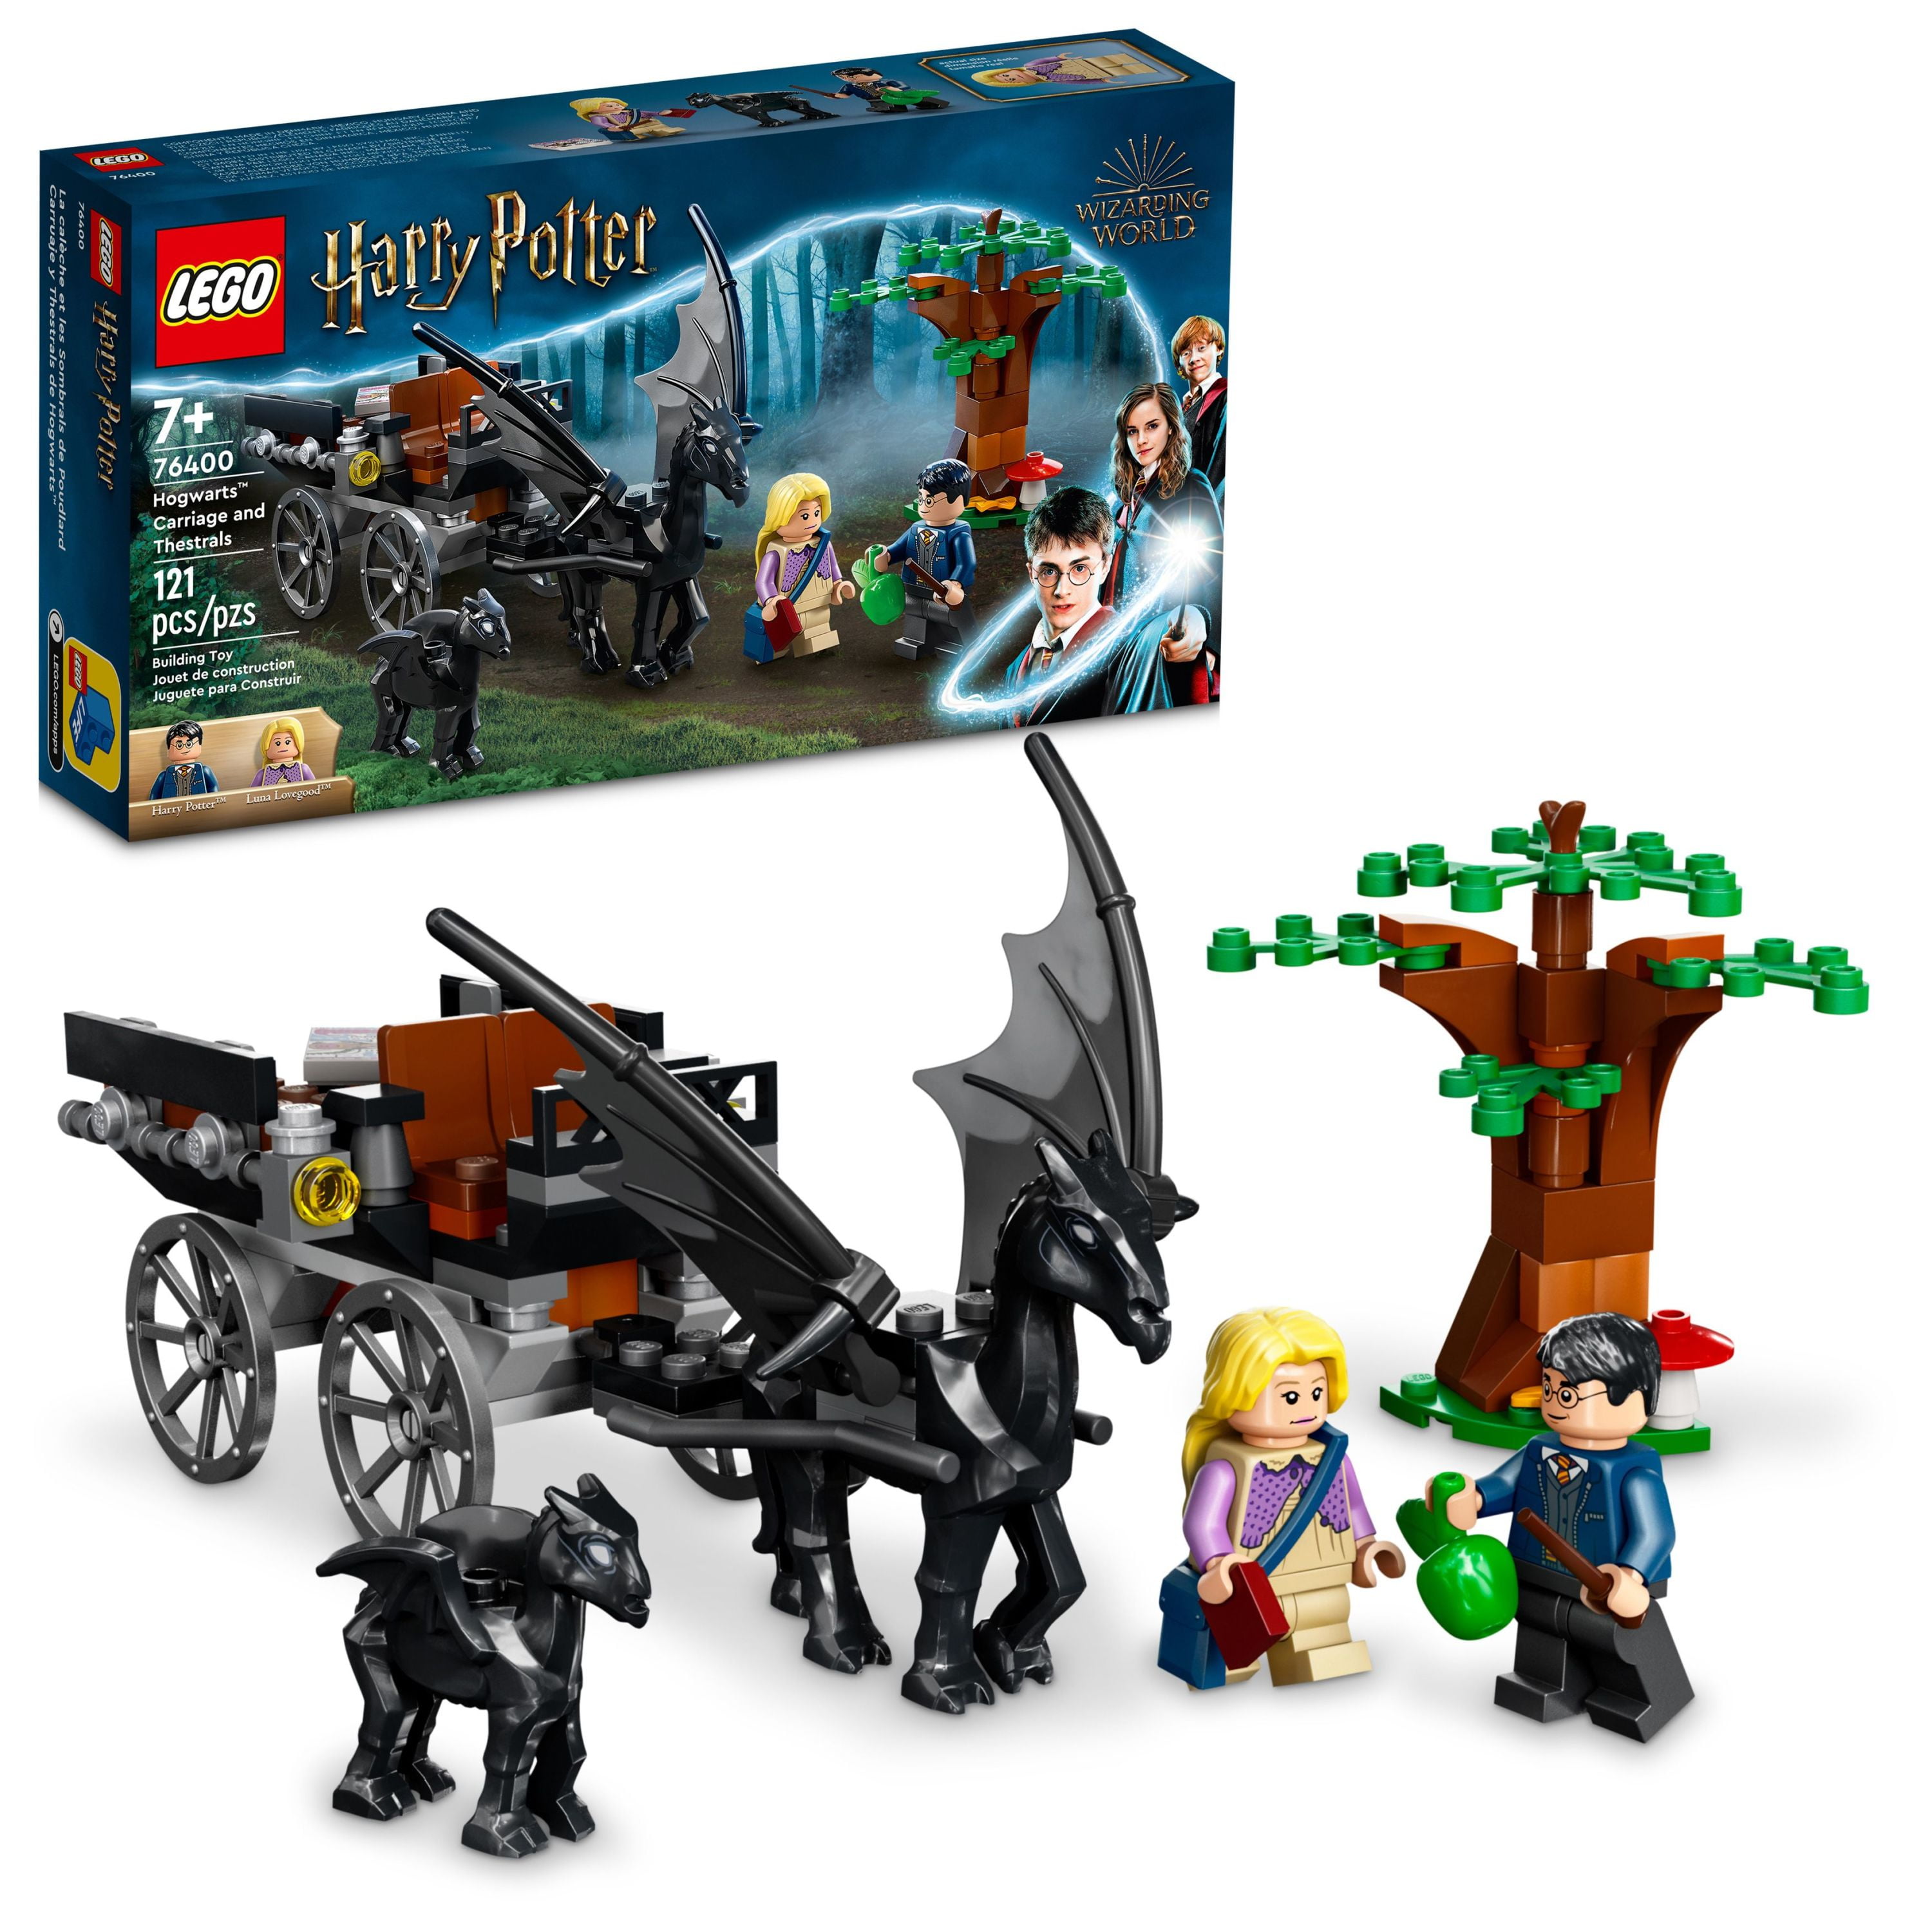 LEGO Harry Potter Hogwarts Carriage & Thestrals Set Building Toy for Kids 7 Plus Years Old with 2 Winged Horse Figures and Luna Lovegood Minifigure - Walmart.com